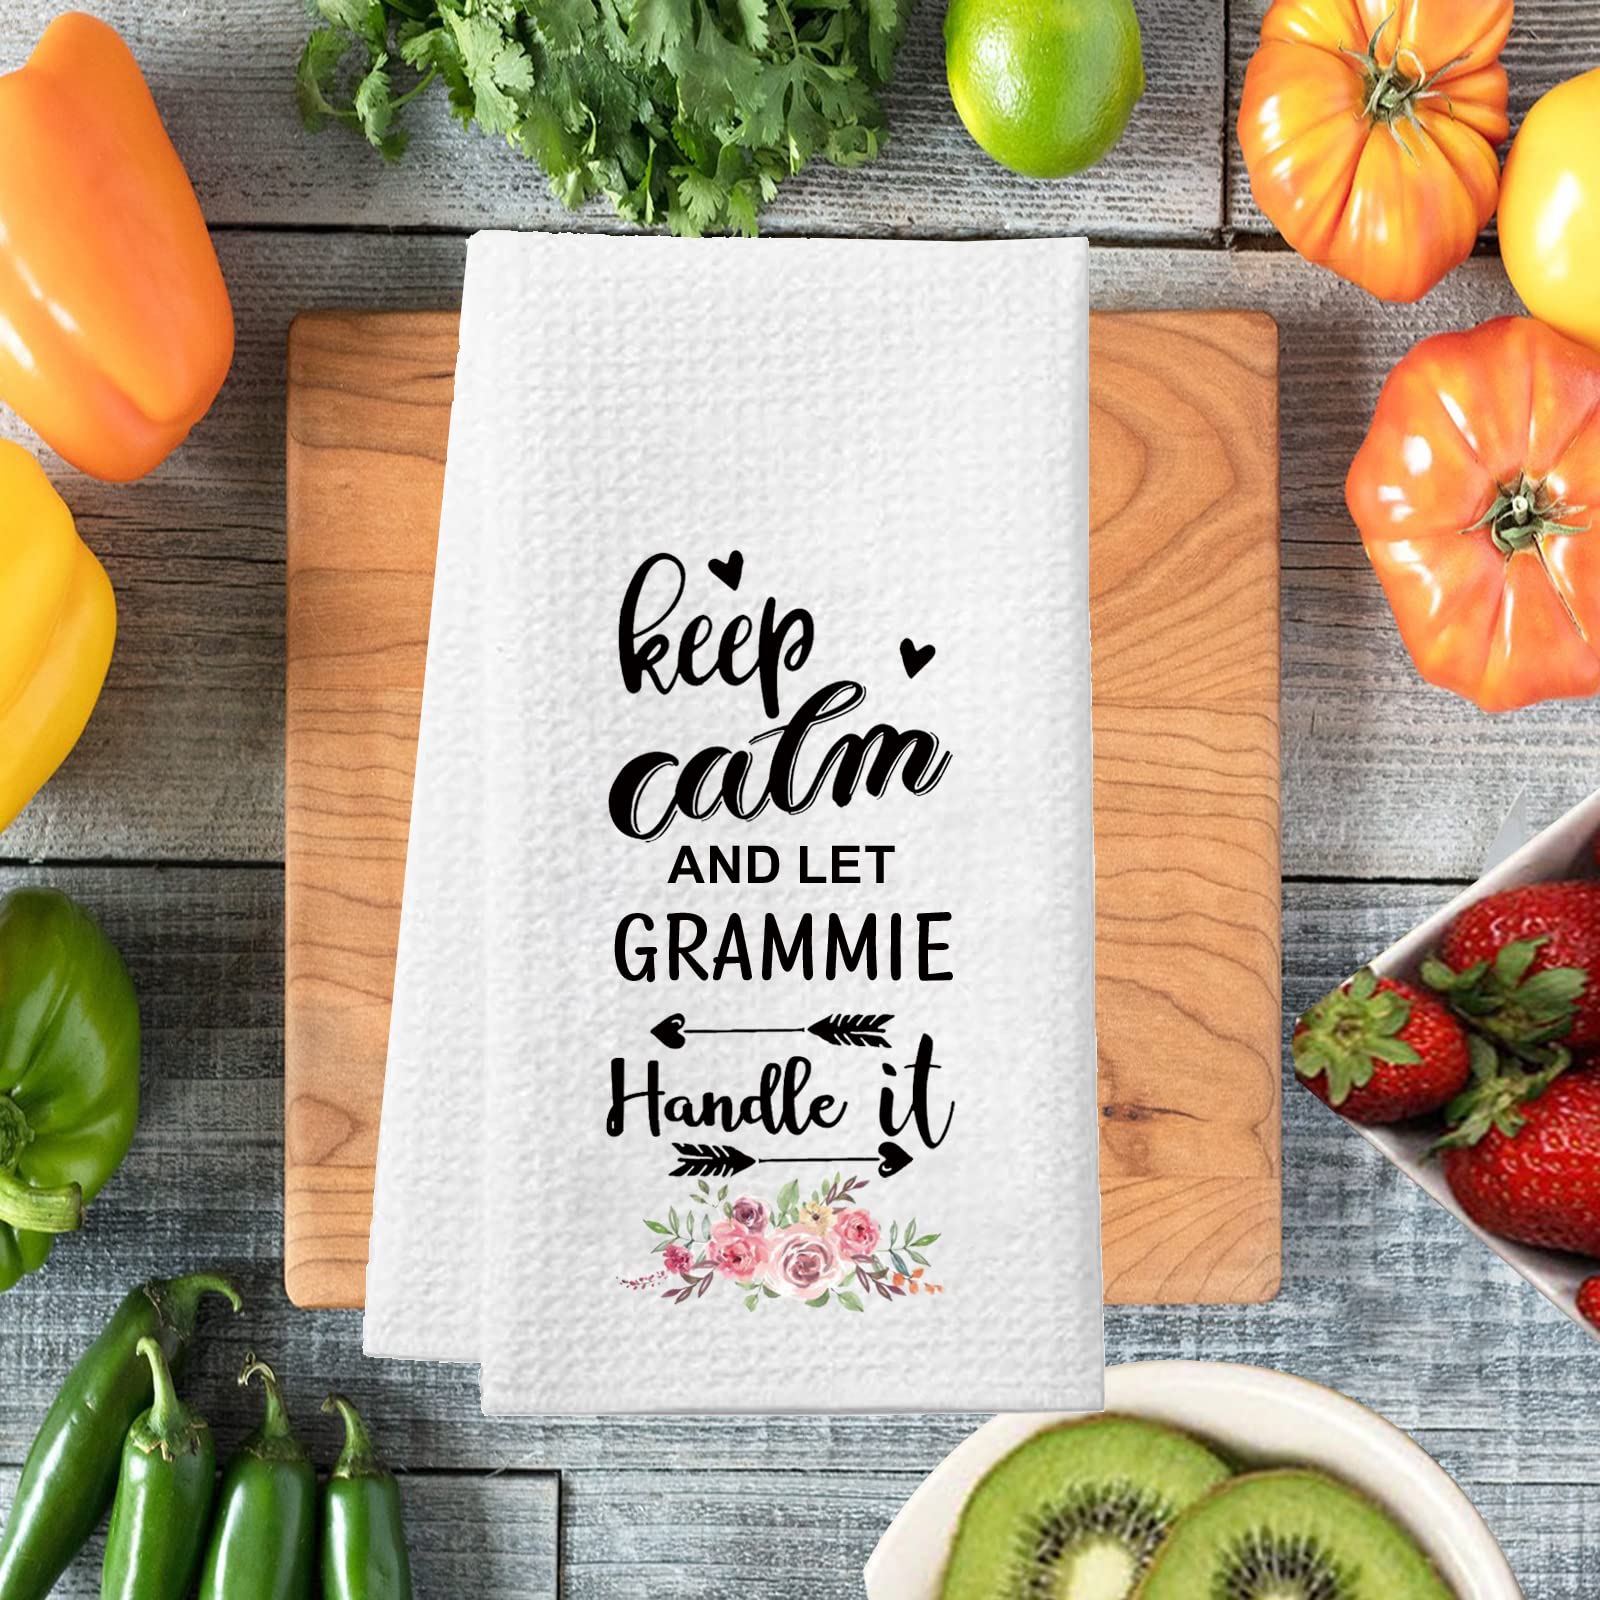 PXTIDY Grammie Kitchen Towel Grammie Gifts Keep Calm and Let Grammie Handle It Flour Sack Towel Kitchen Dish Towel Sweet Housewarming Gifts